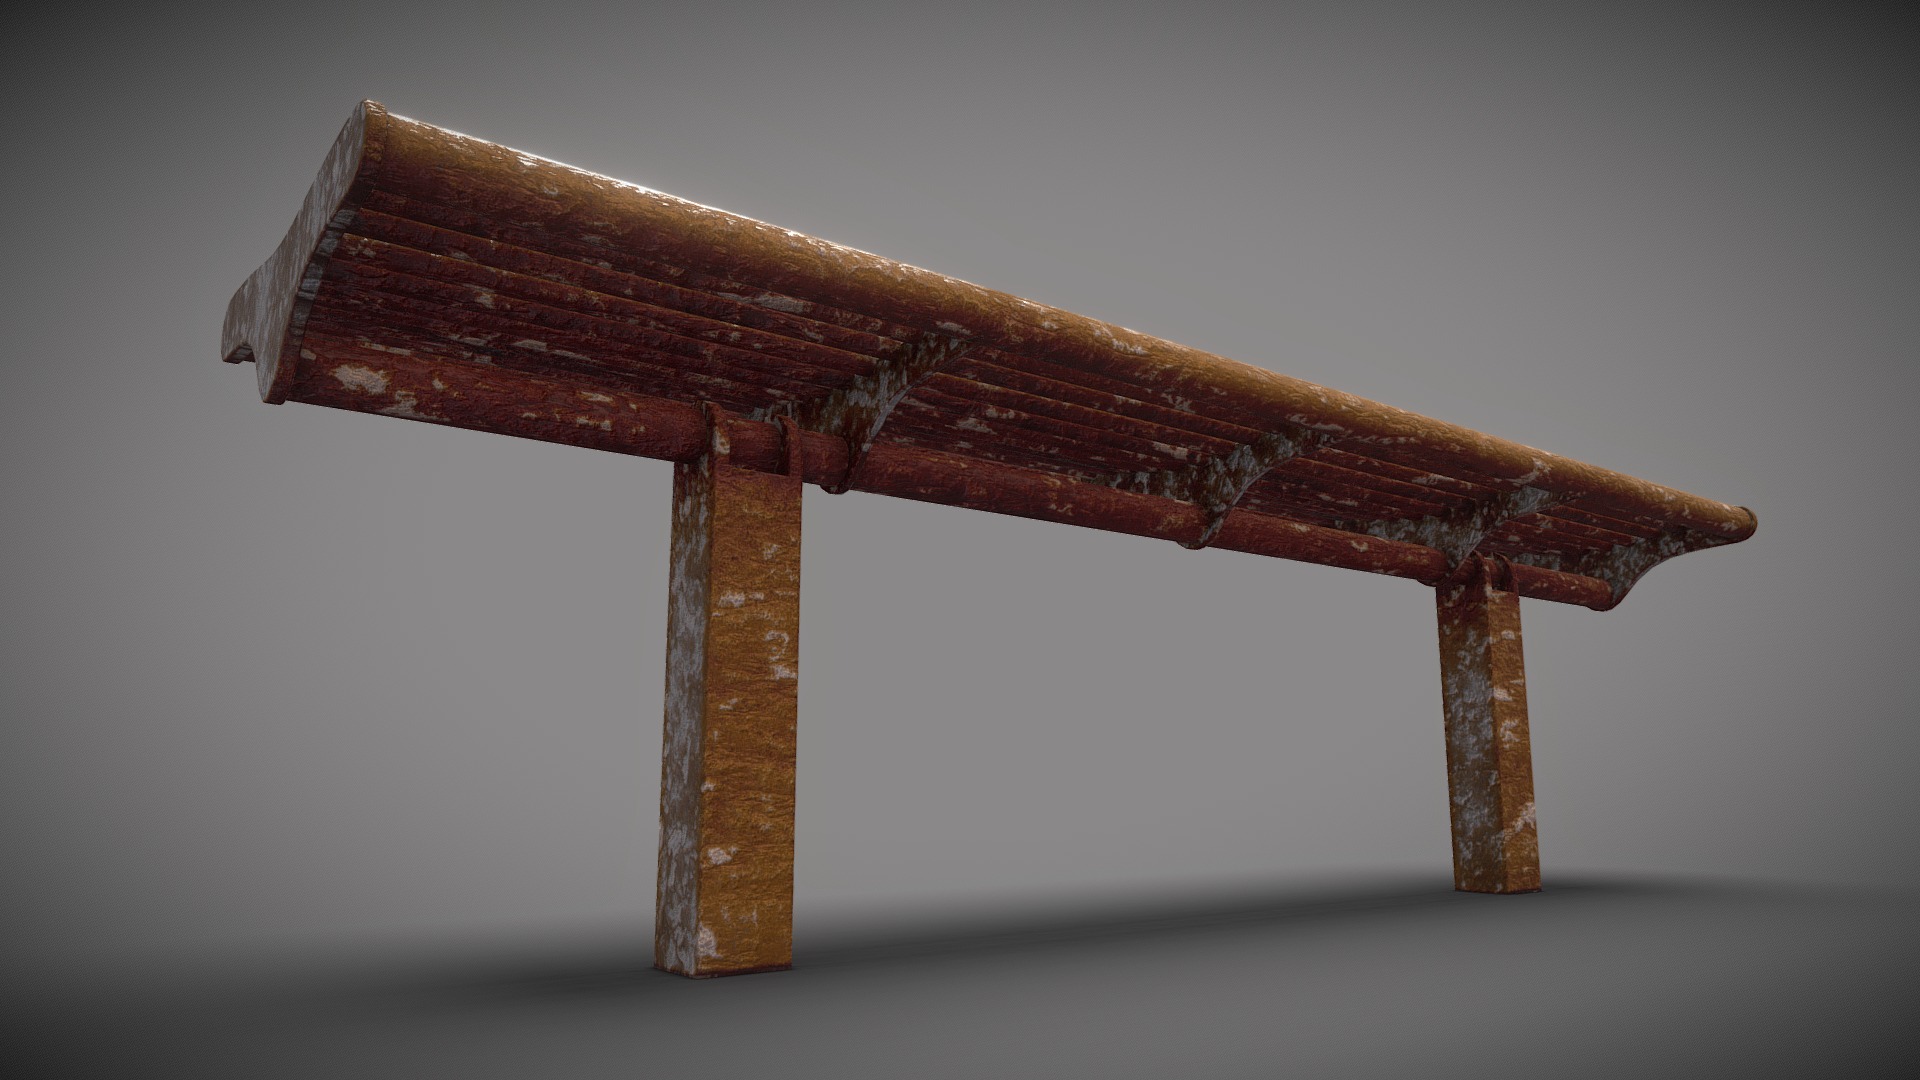 3D model Bench [5] (Low-Poly) (Rusted Version) - This is a 3D model of the Bench [5] (Low-Poly) (Rusted Version). The 3D model is about a wooden bench with a wooden seat.